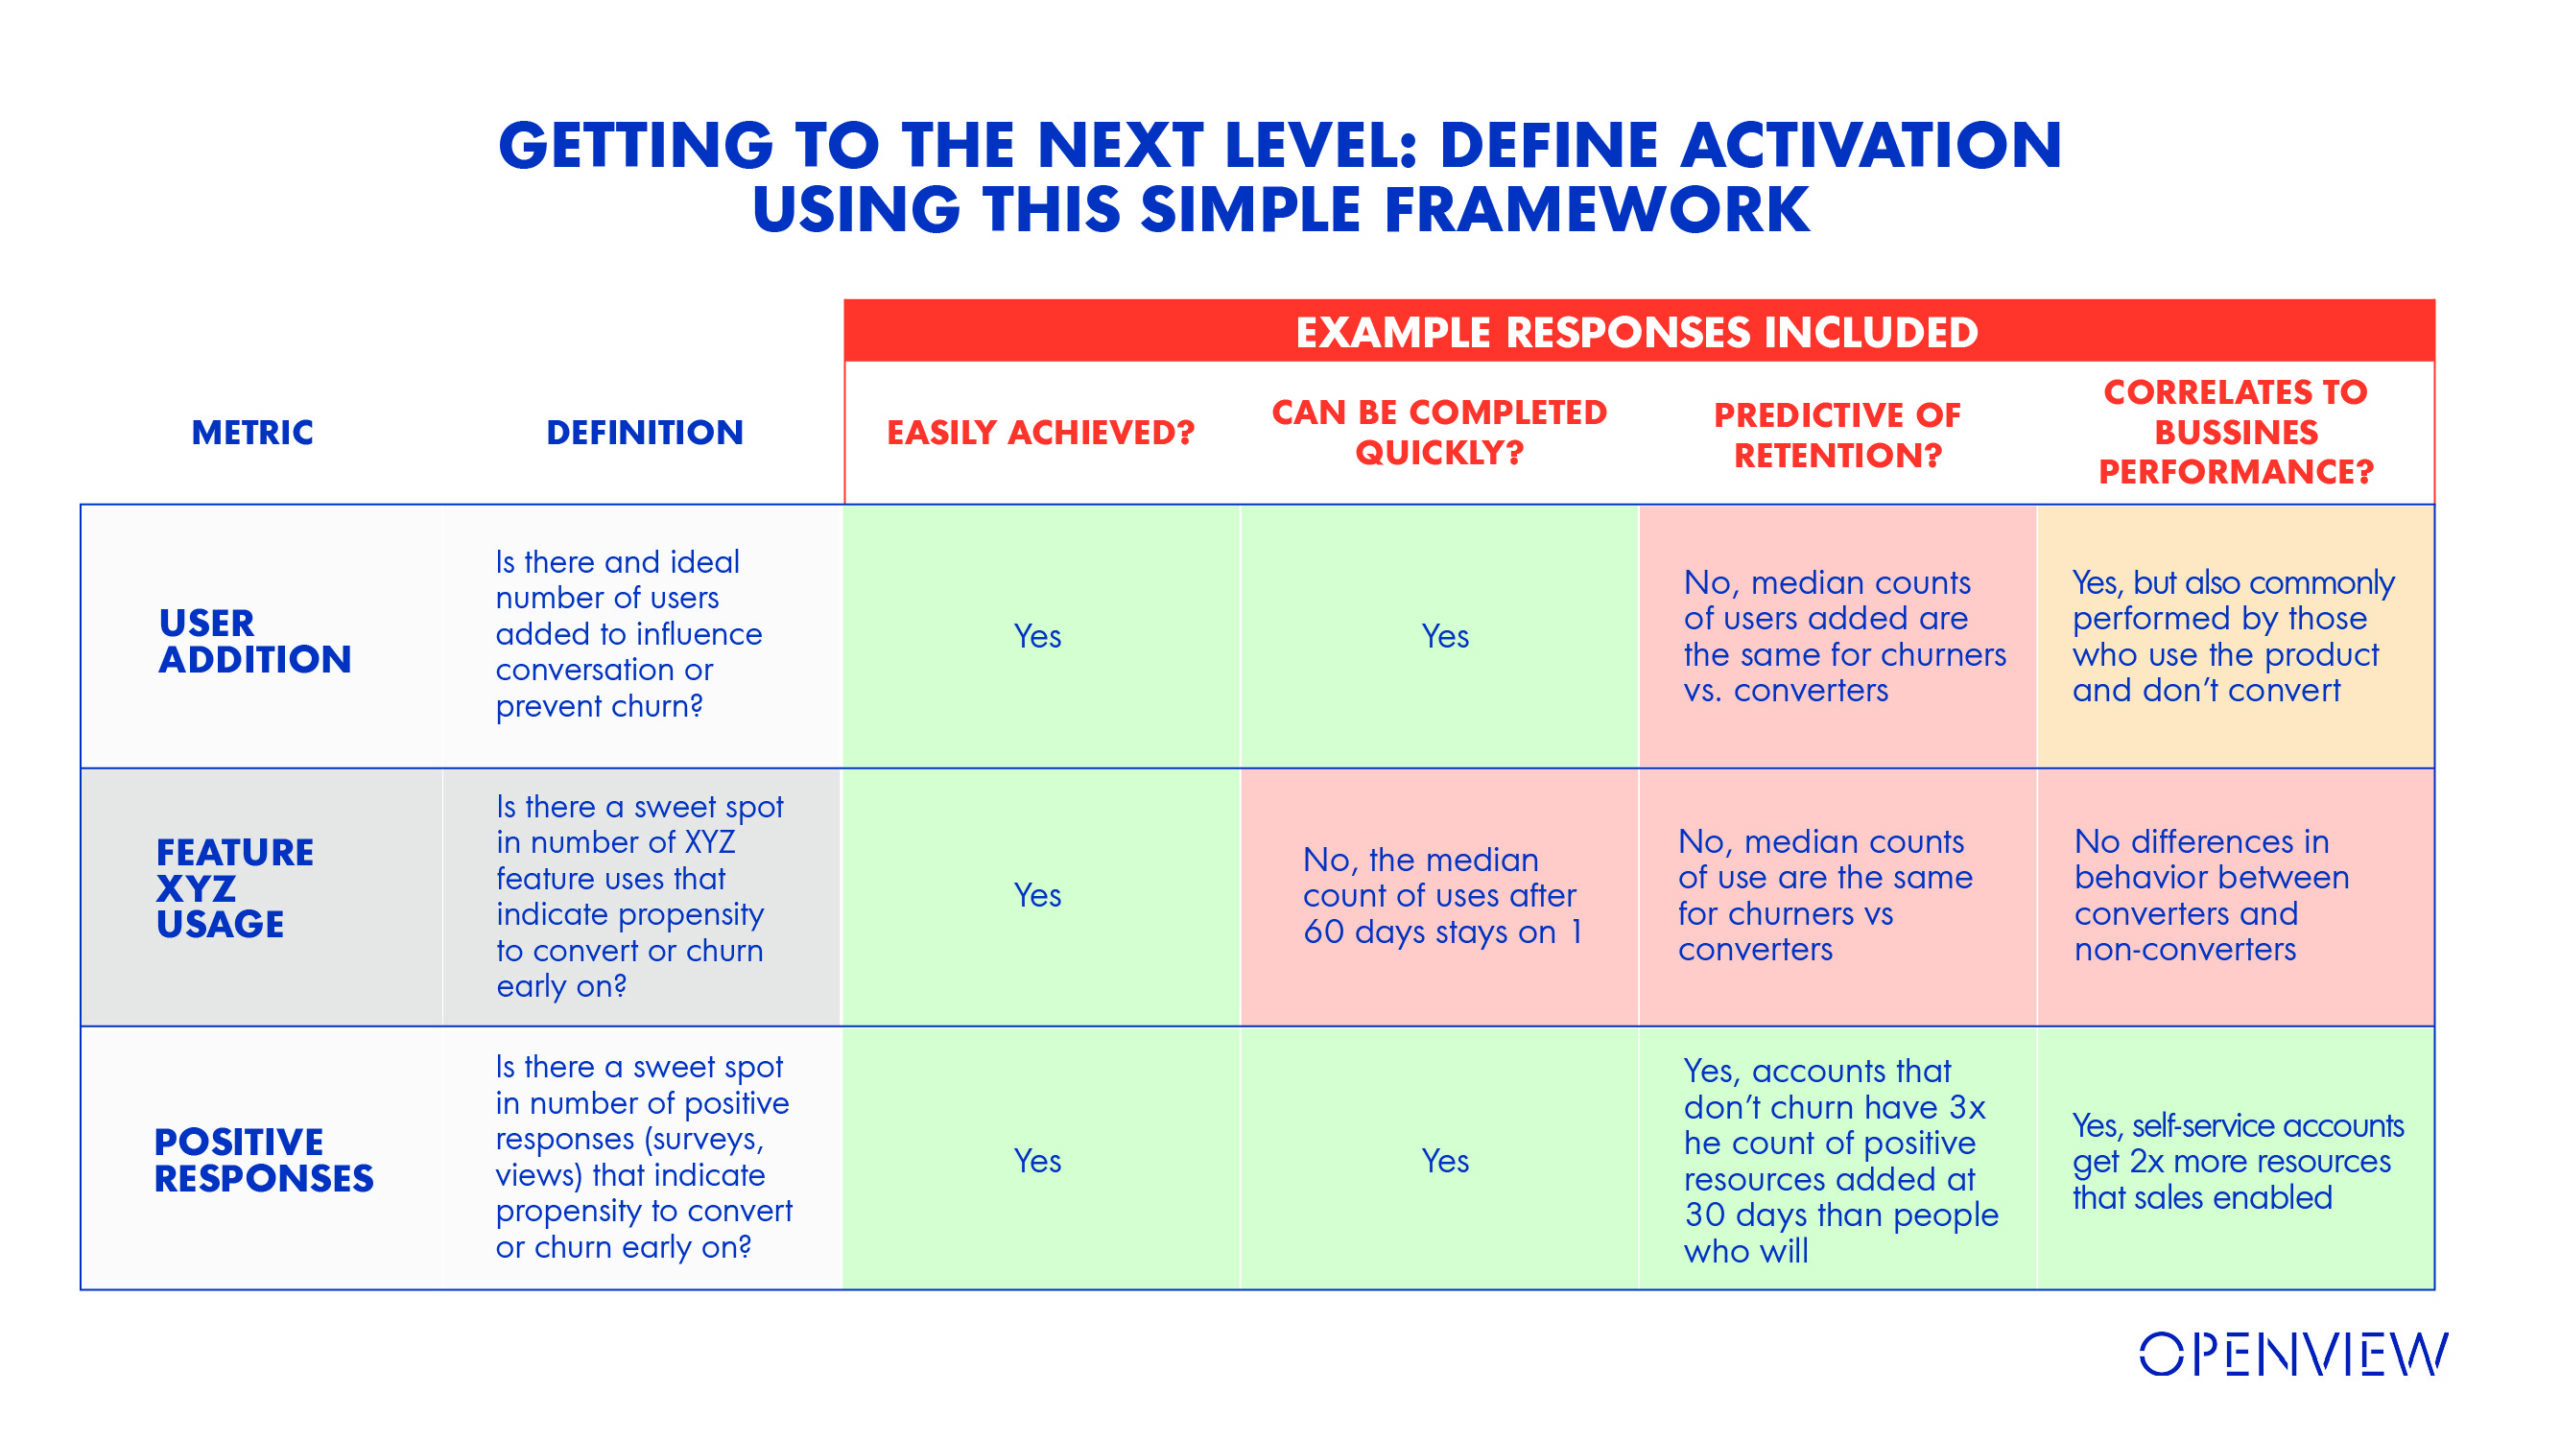 OpenView's Product Activation Chart